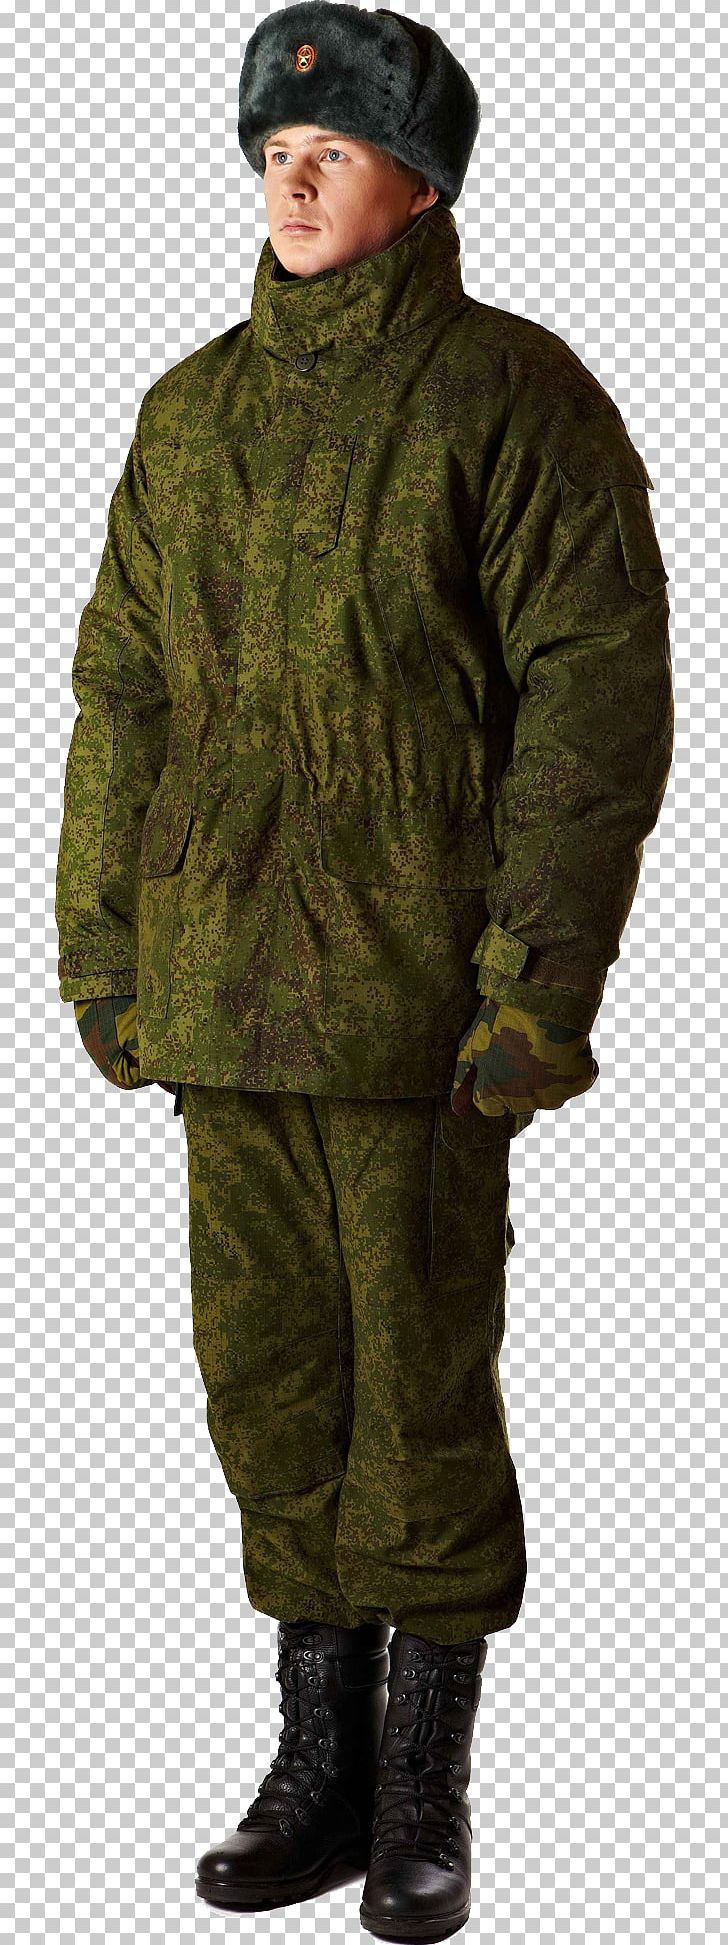 Russian Armed Forces Soldier Army Military PNG, Clipart, Army, Army Combat Uniform, Army Officer, Infantry, Jacket Free PNG Download